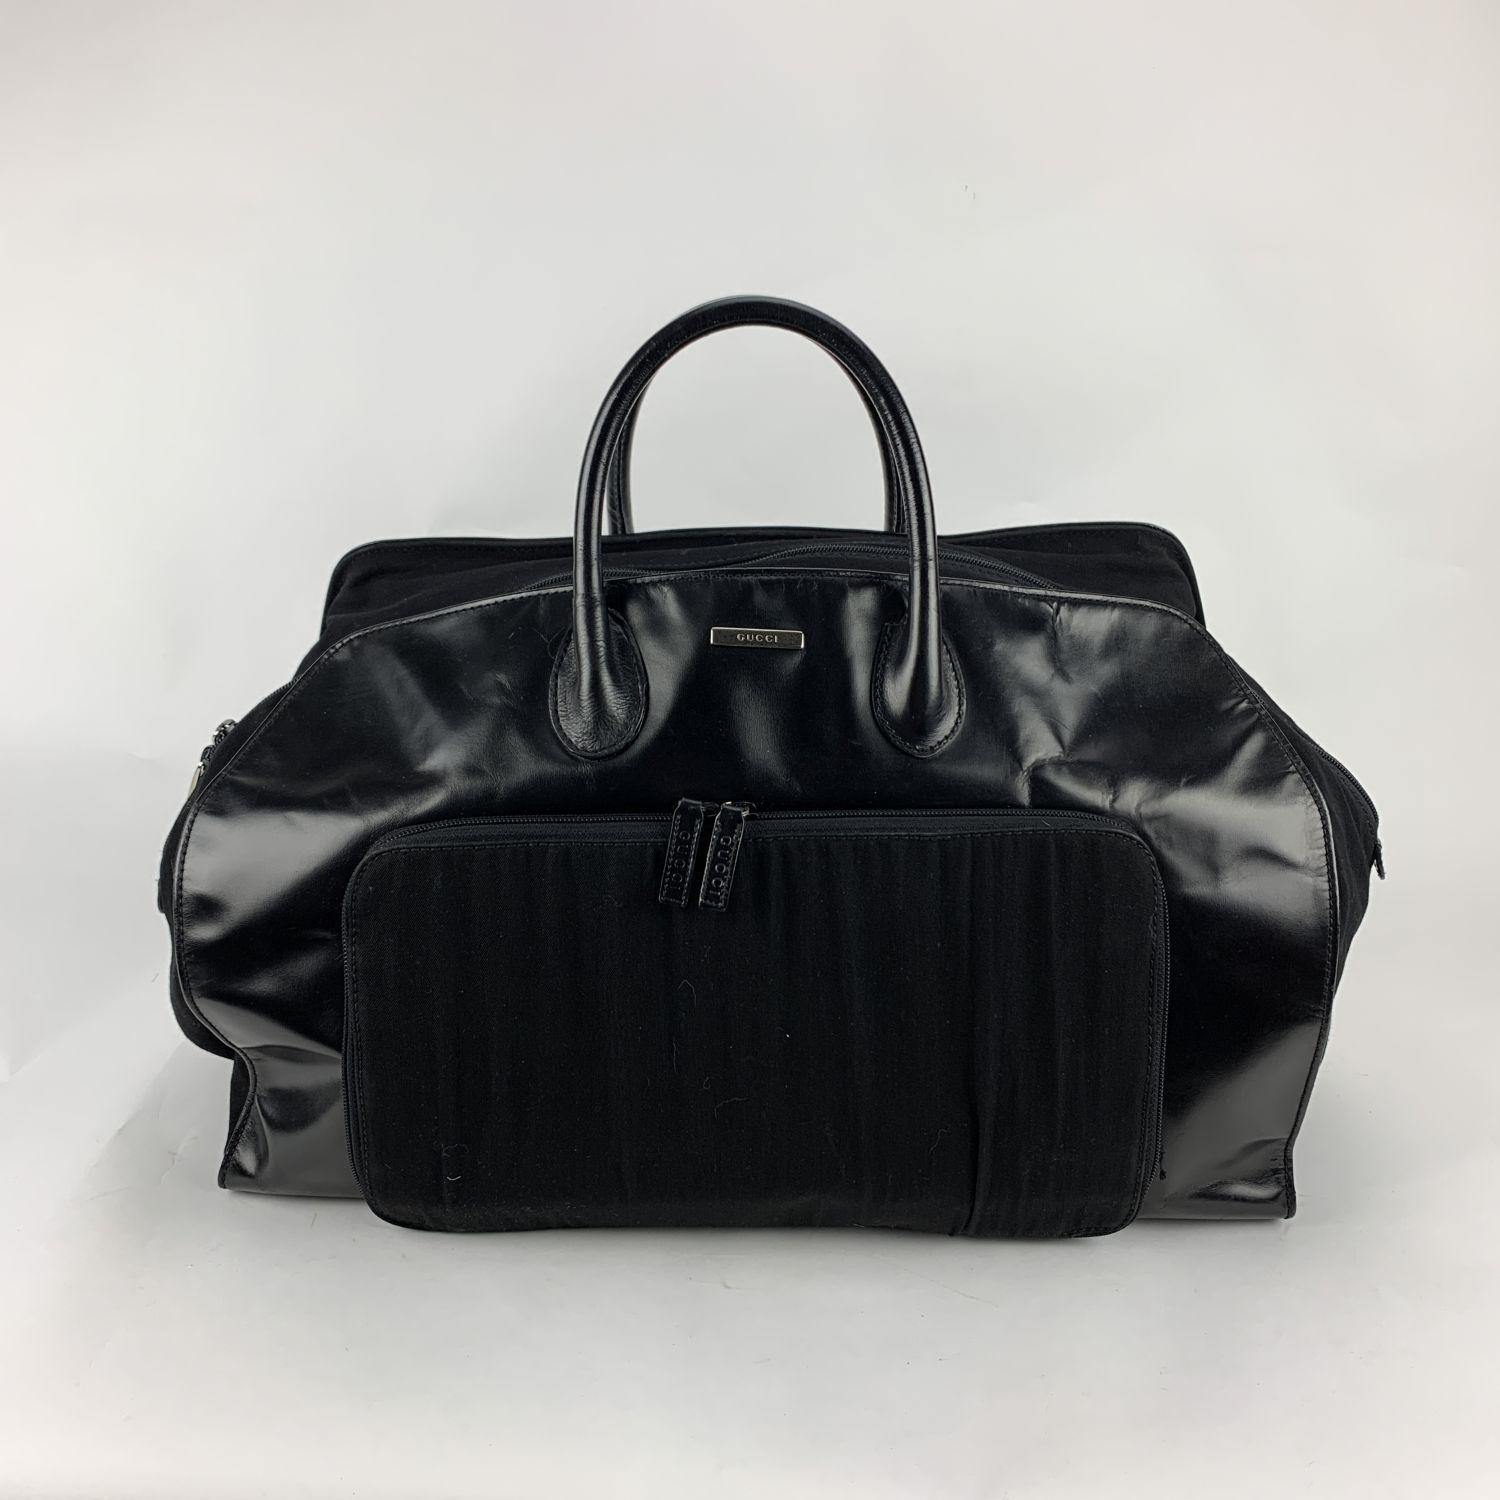 Gucci Black Canvas Travel Bag weekender bag. Black canvas and genuine leather. Top carry handles. Upper zipper closure. Silver metal hardware. Front zip pocket. 5 bottom feet. Black fabric lining . 1 side zip pocket inside. 'GUCCI - made in Italy'